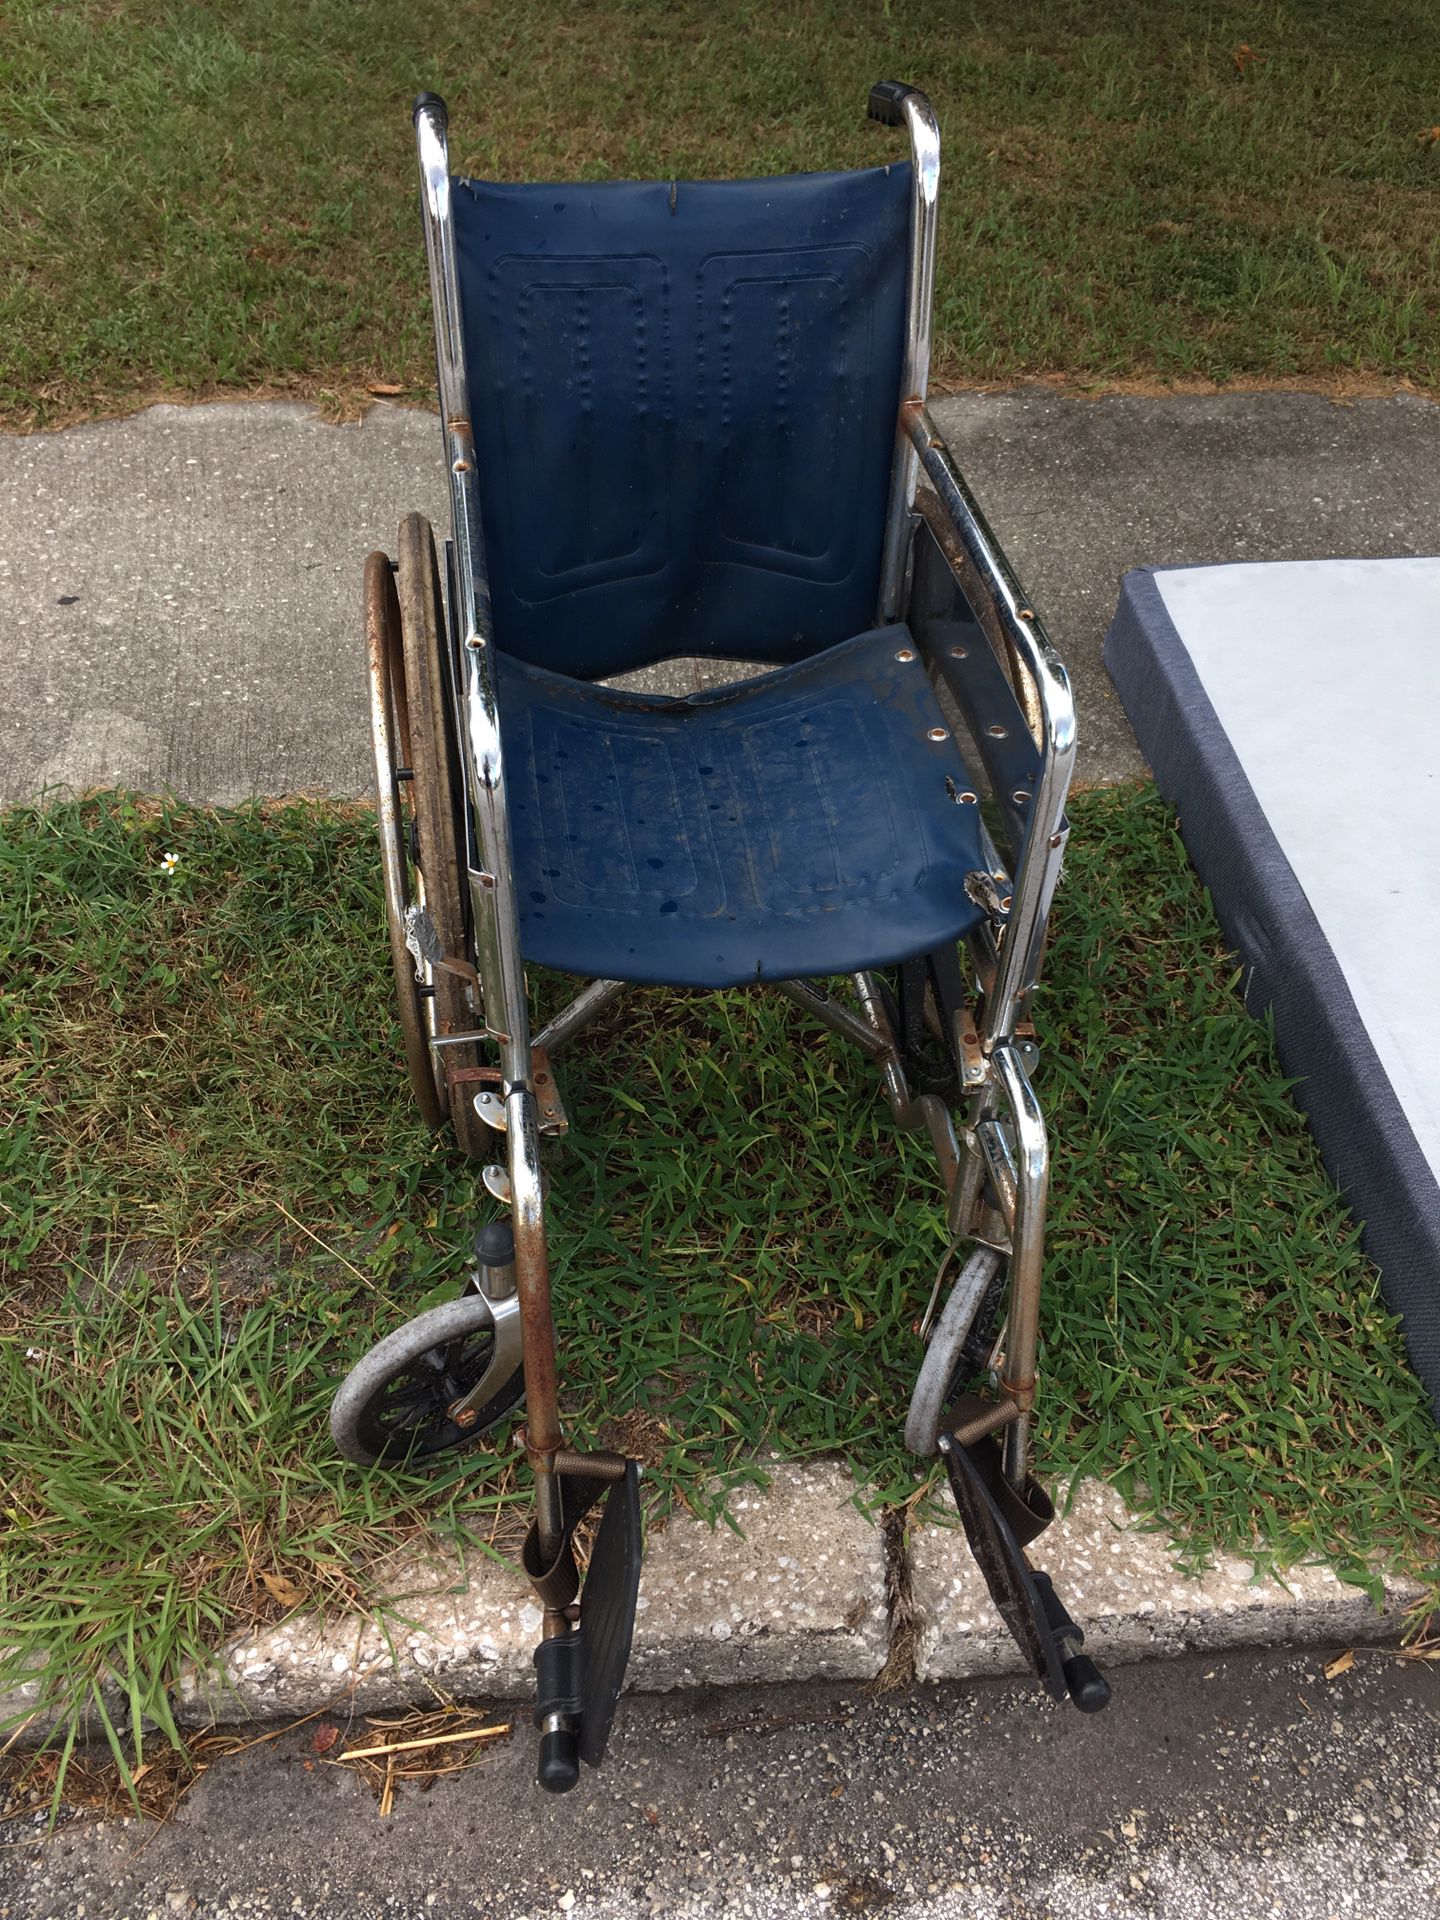 Free old wheel chair curb side